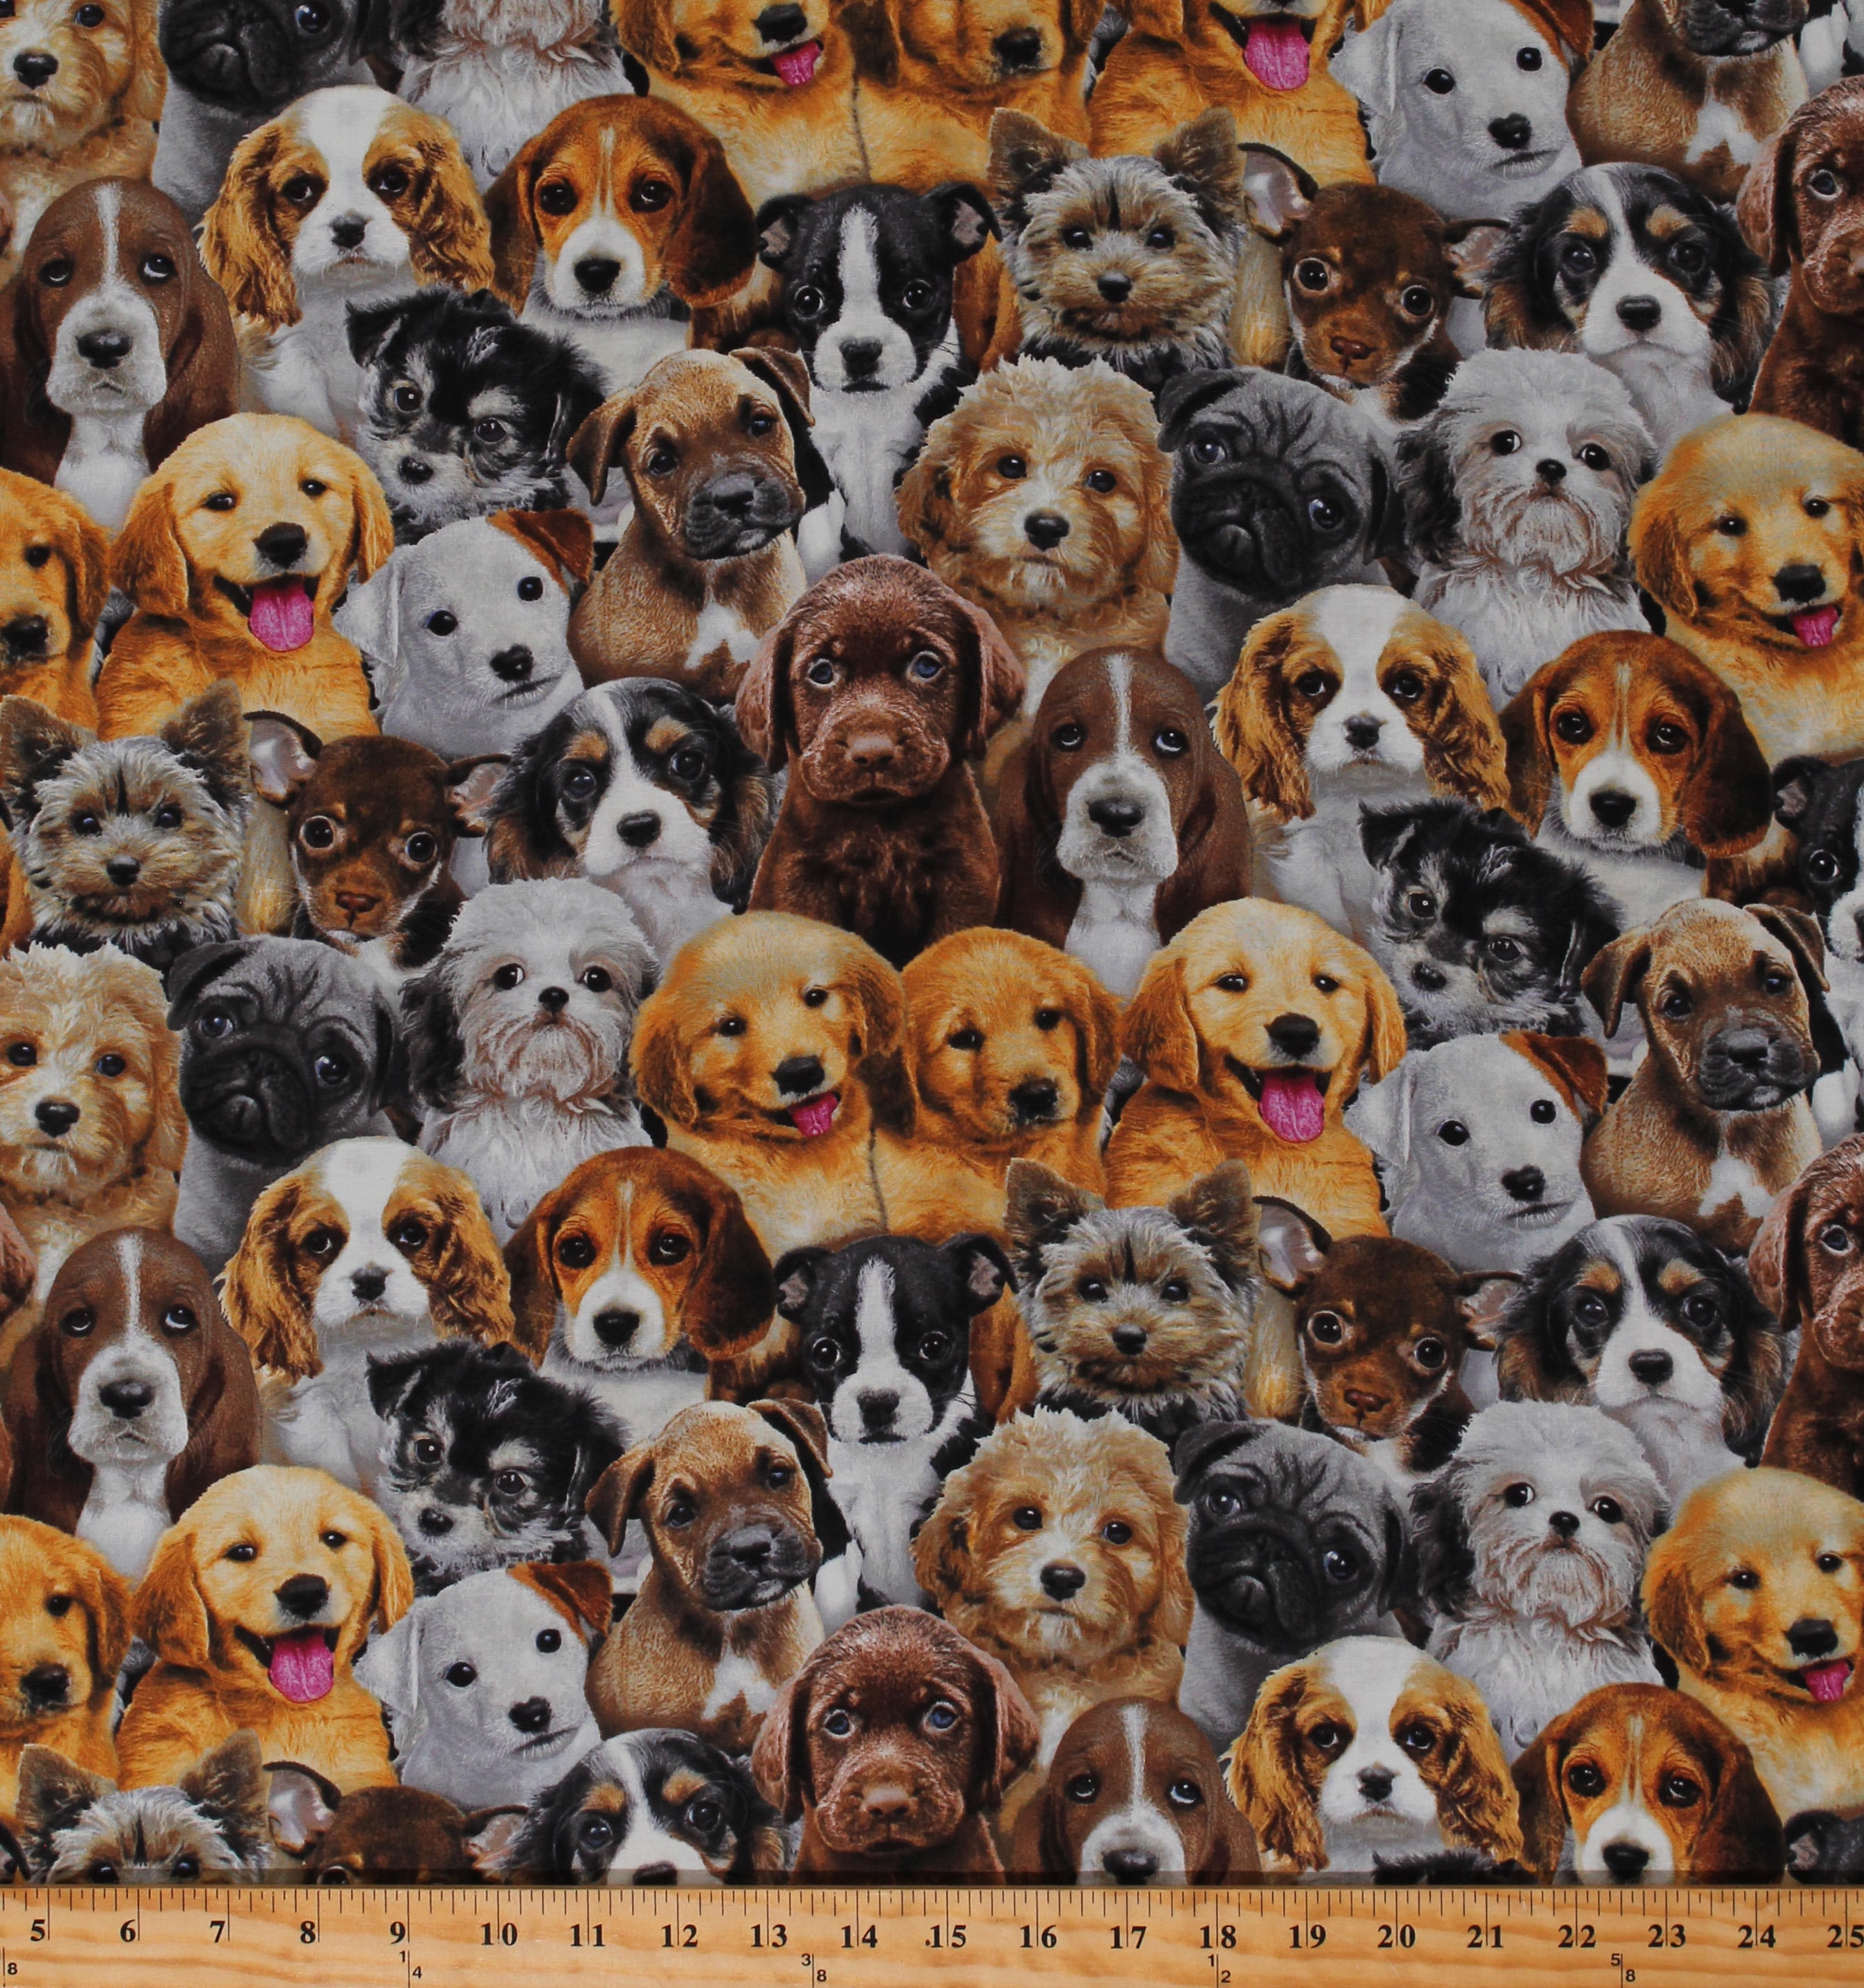 Puppies Nursery Fabric The Highest Quality Cloth For Baby Cute Dogs Cotton Fabric Premium Textile